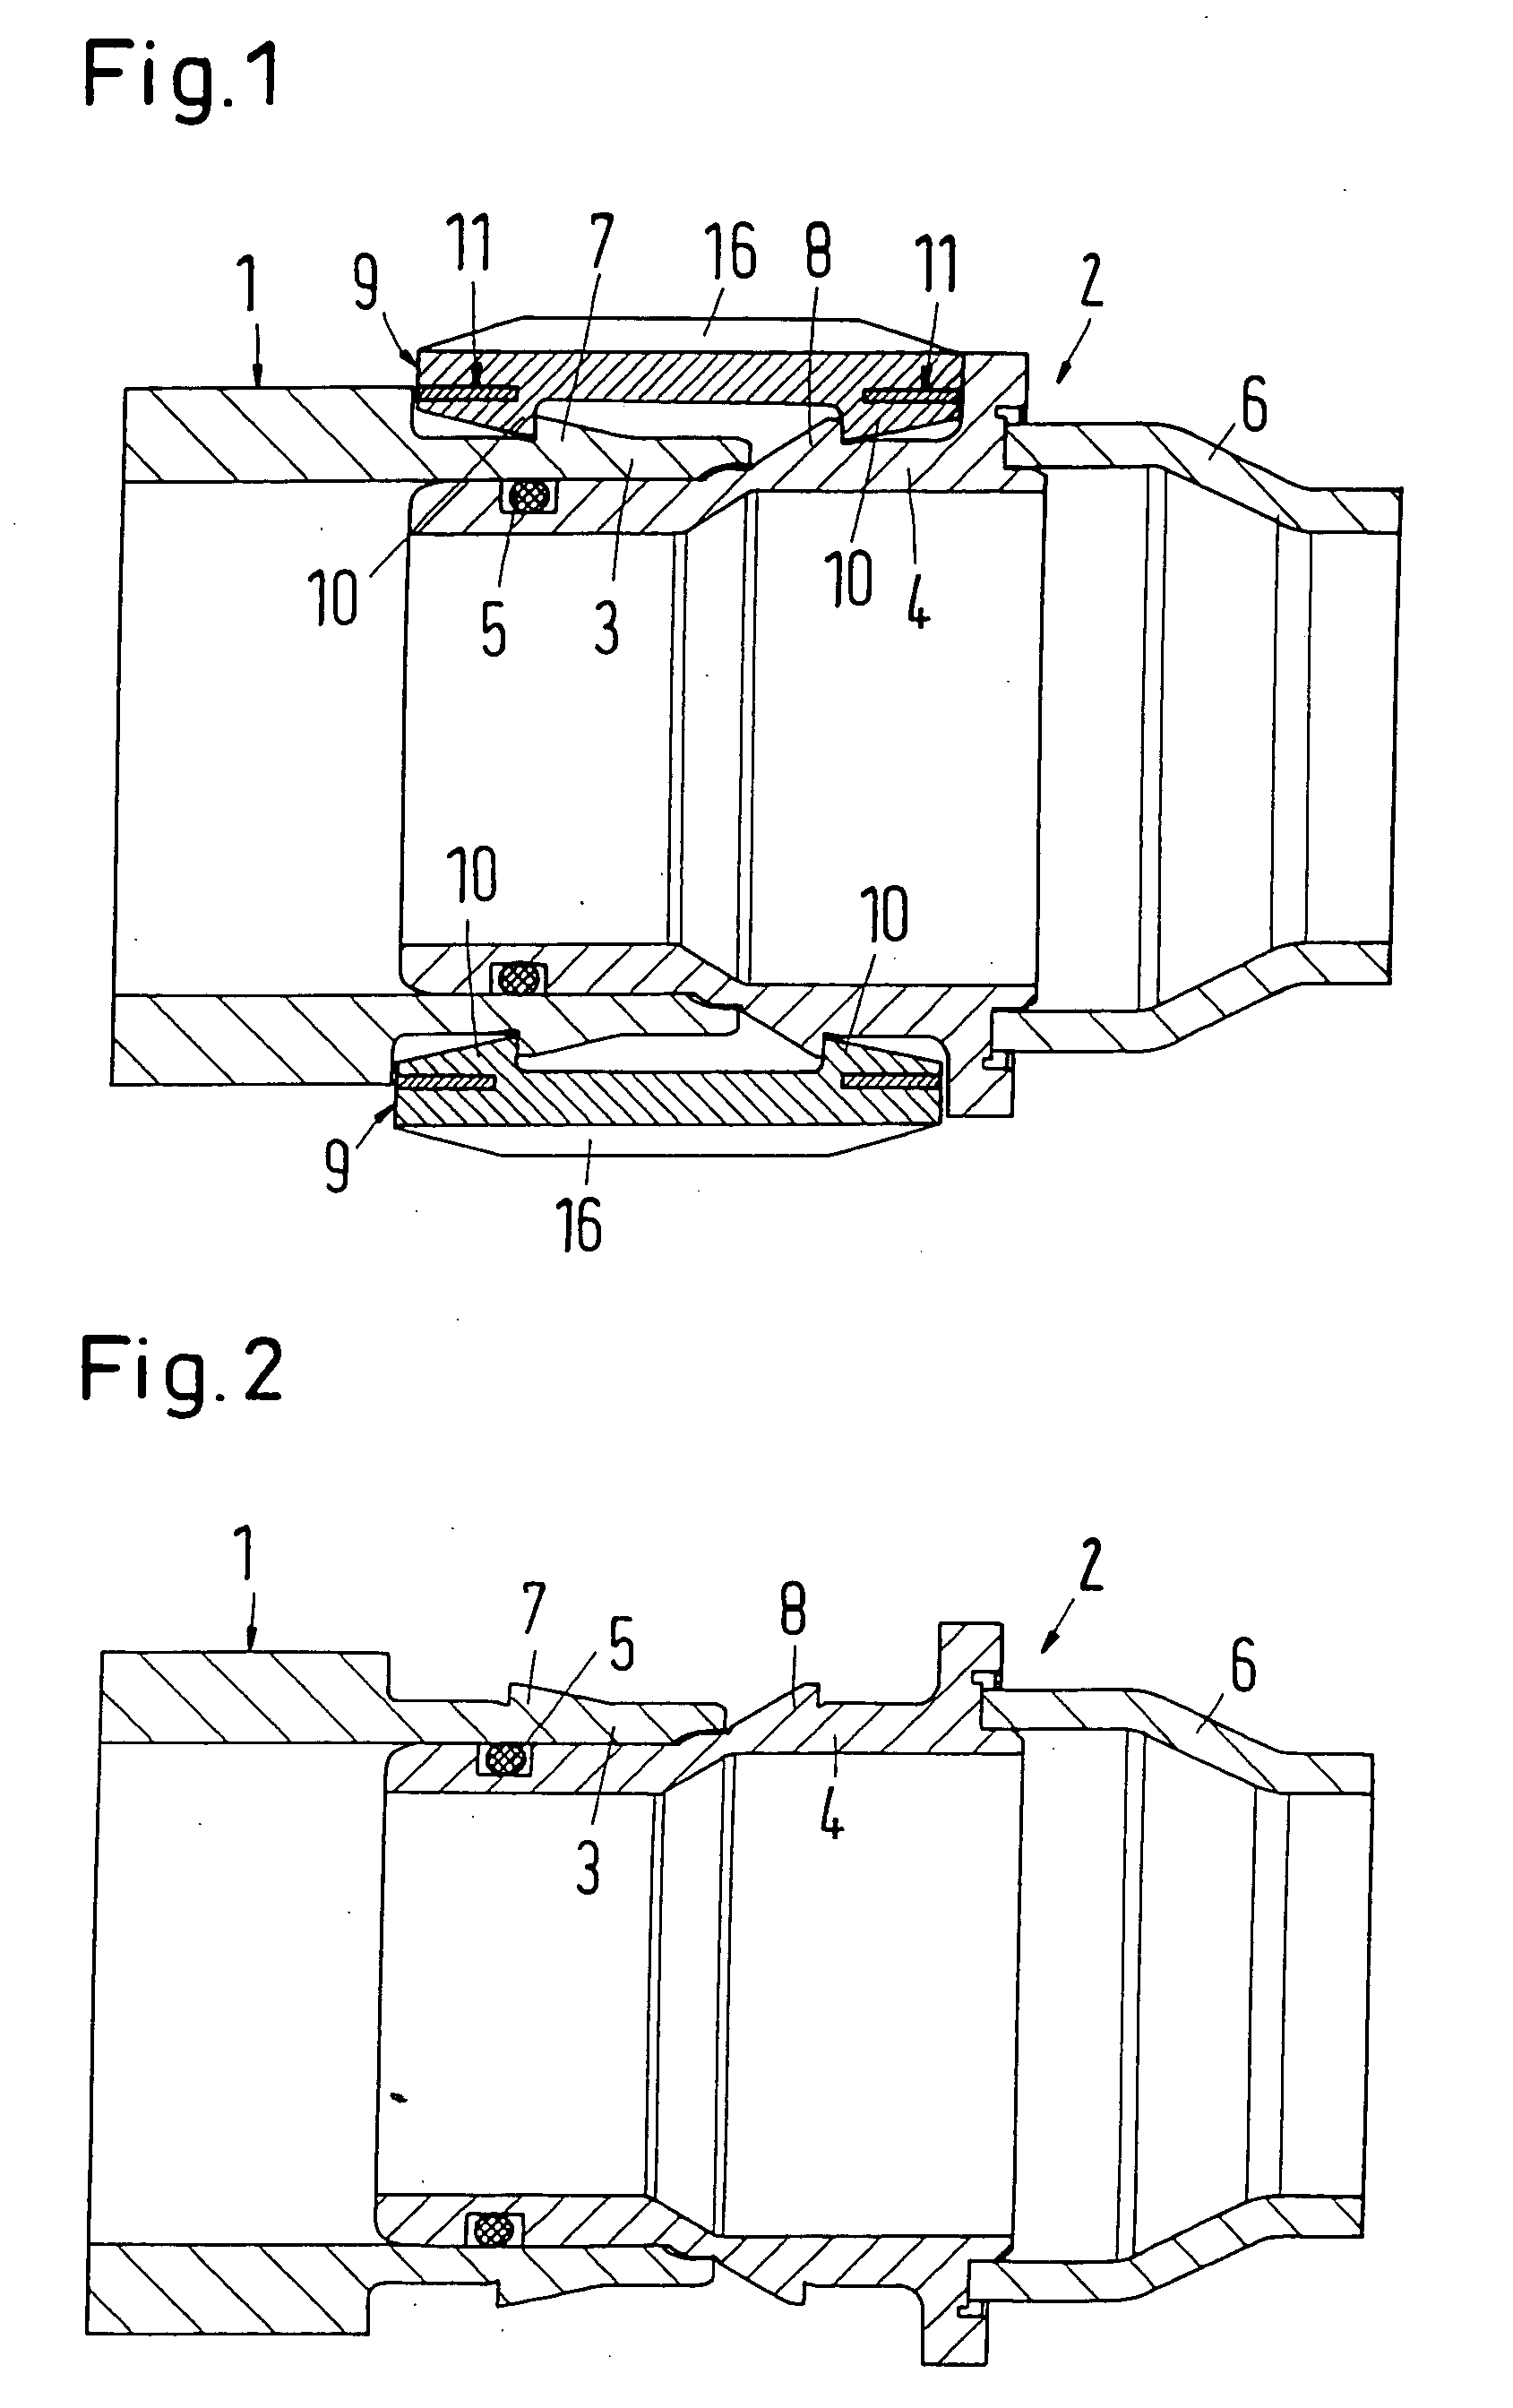 Coupling for joining two pipes